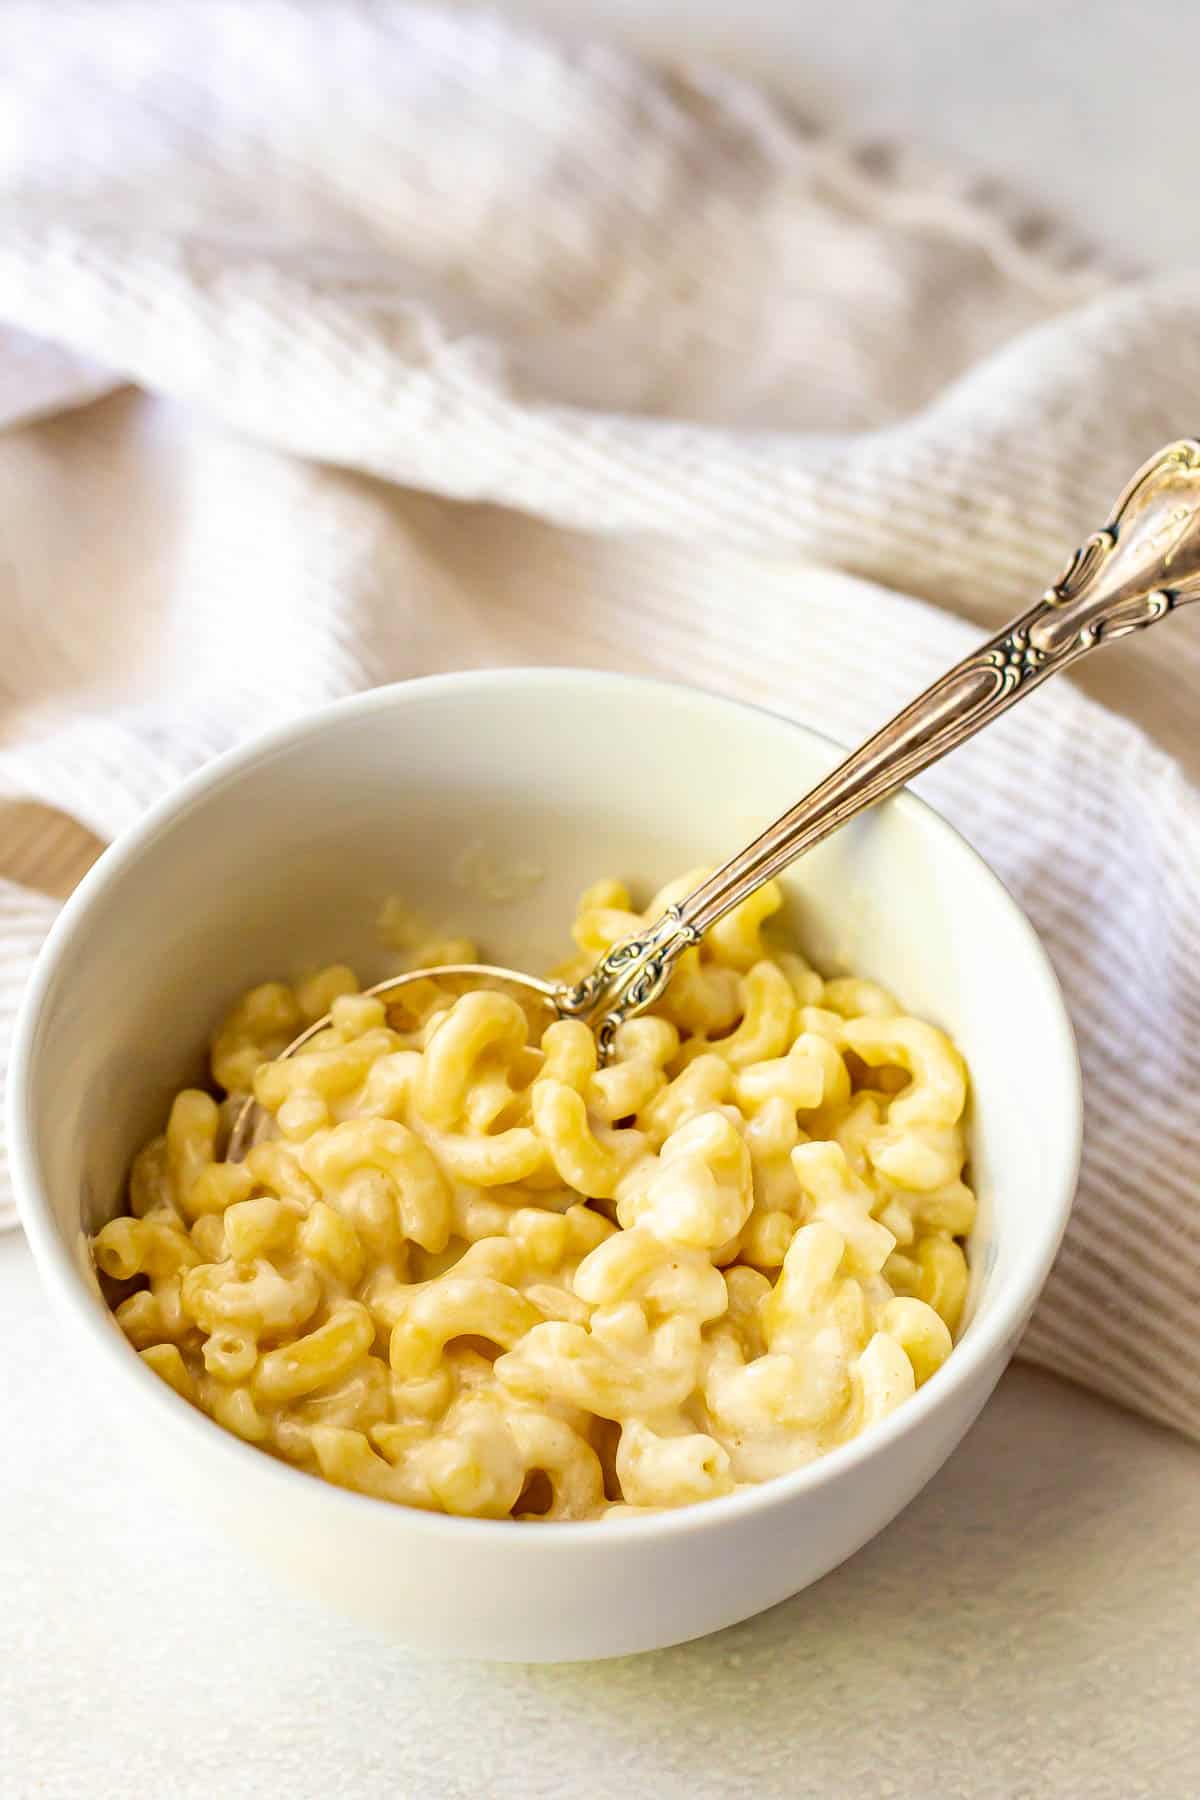 A spoon resting in a bowl with a serving of mac and cheese.